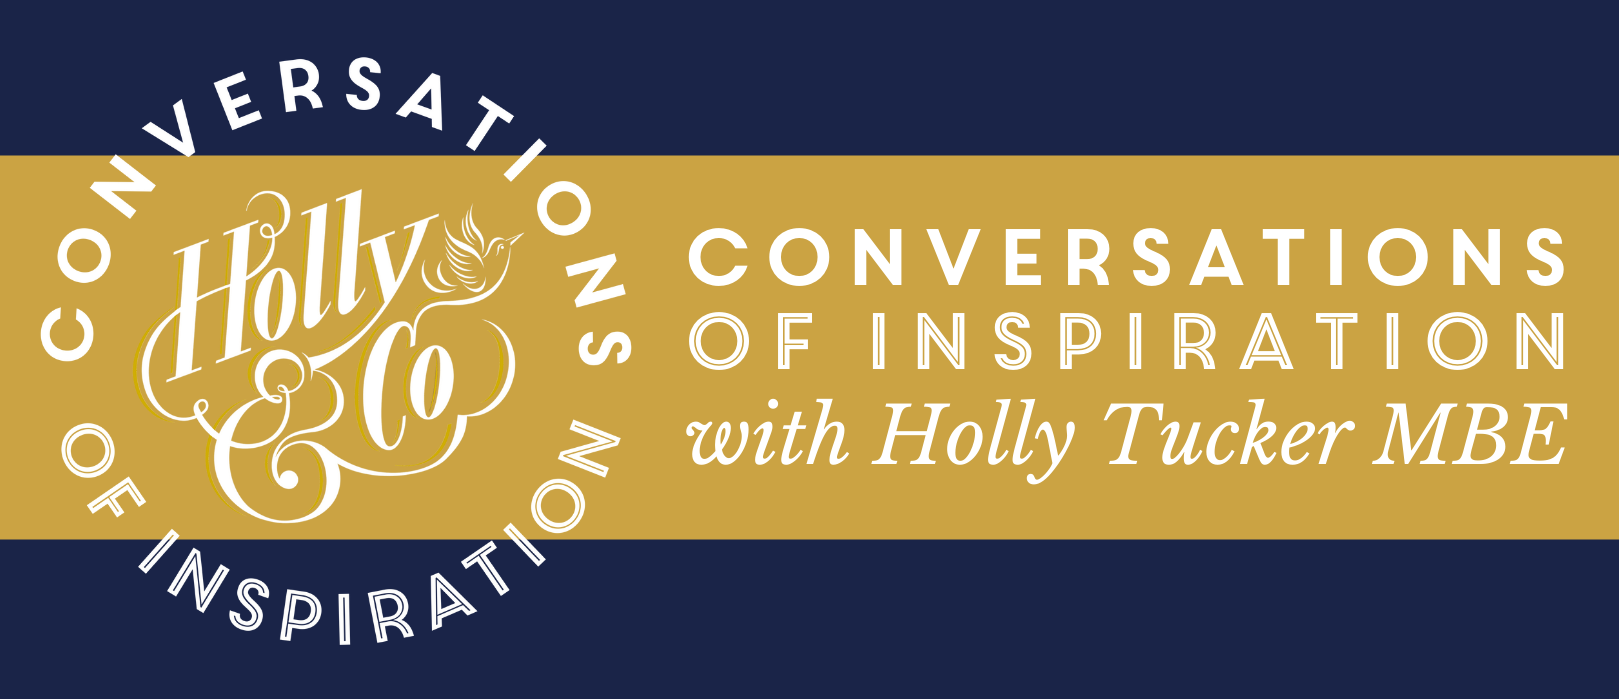 Conversations of Inspiration by Founding Director Katy Emck